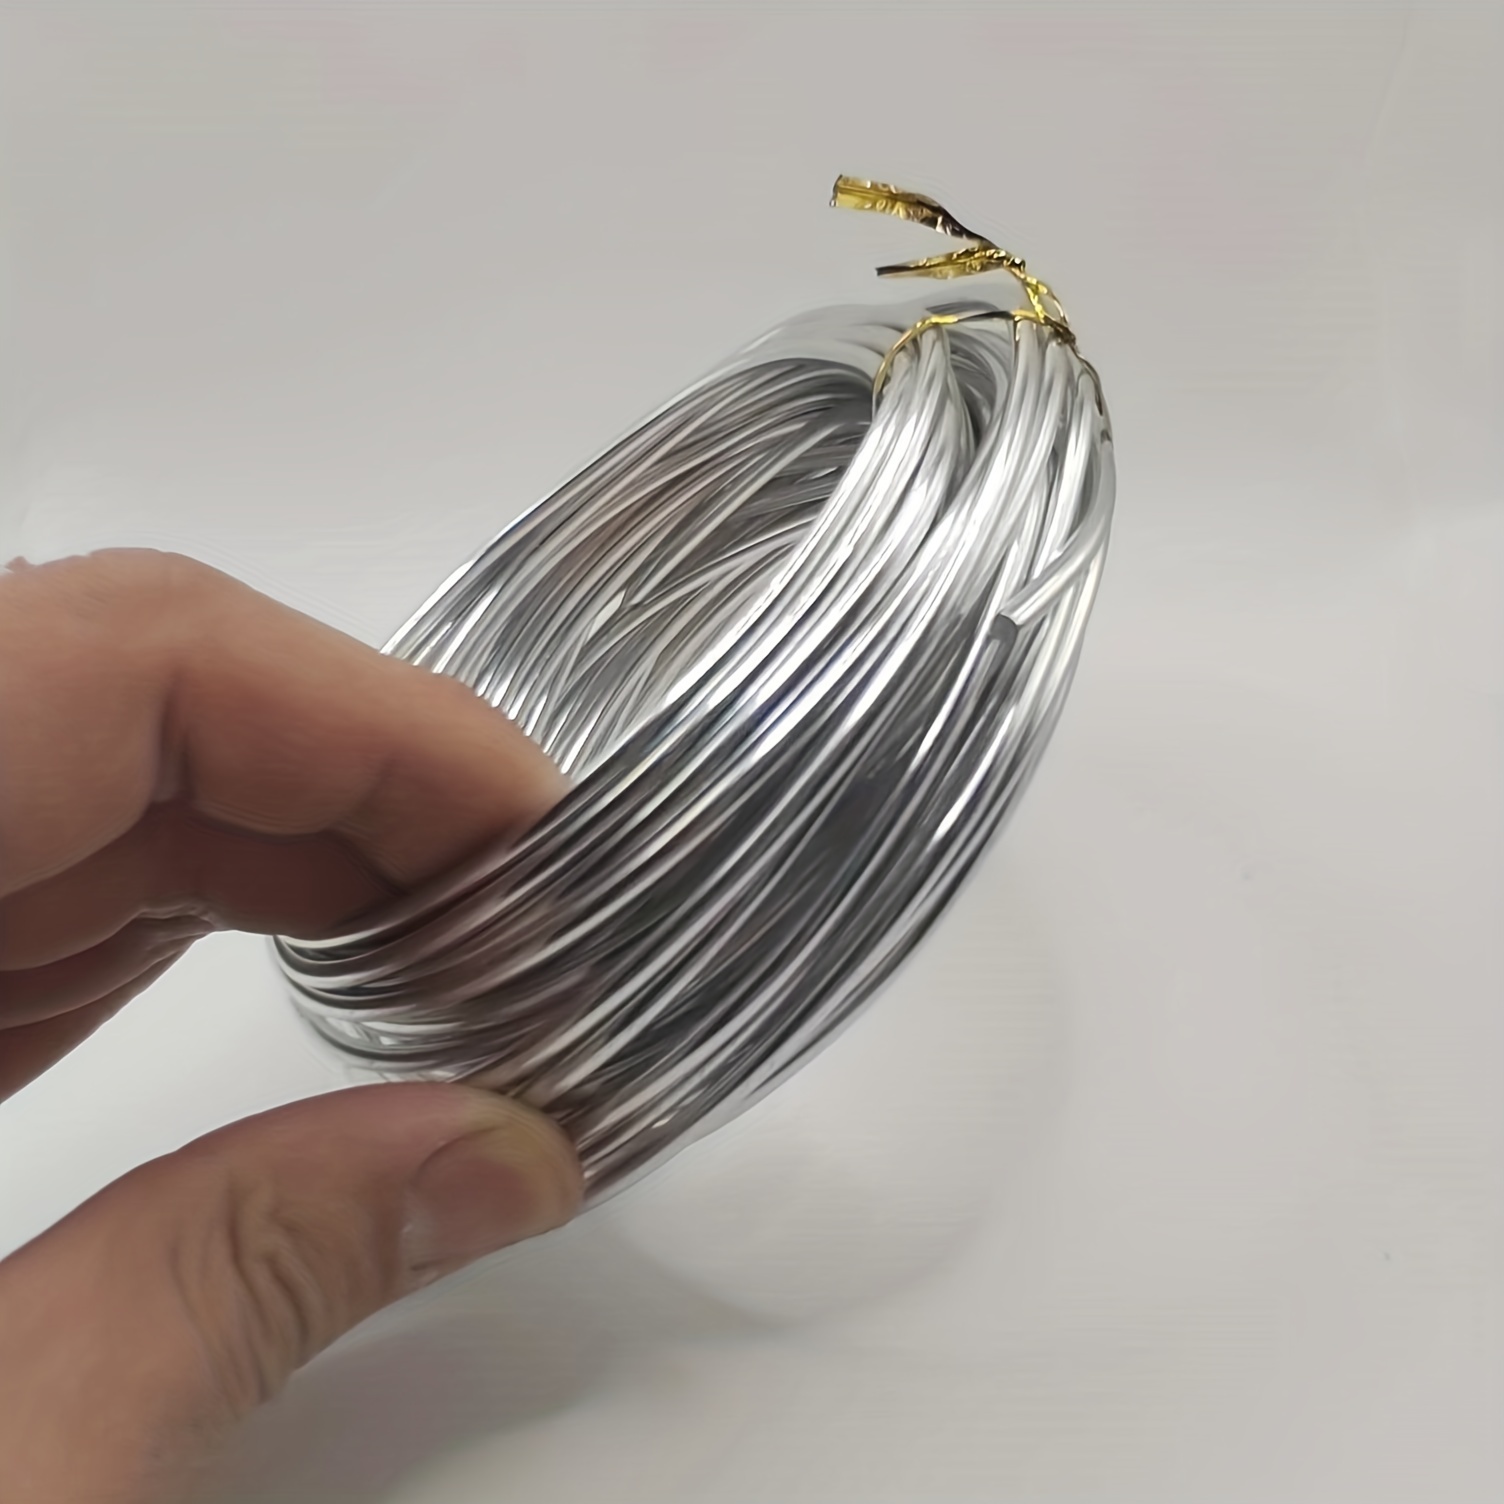 LEMESO Aluminium Wire, Flexible Metal Sliver Wire, for DIY Crafts, Jewelry  Making, 1mm/18 Gauge, 492 Feet Total